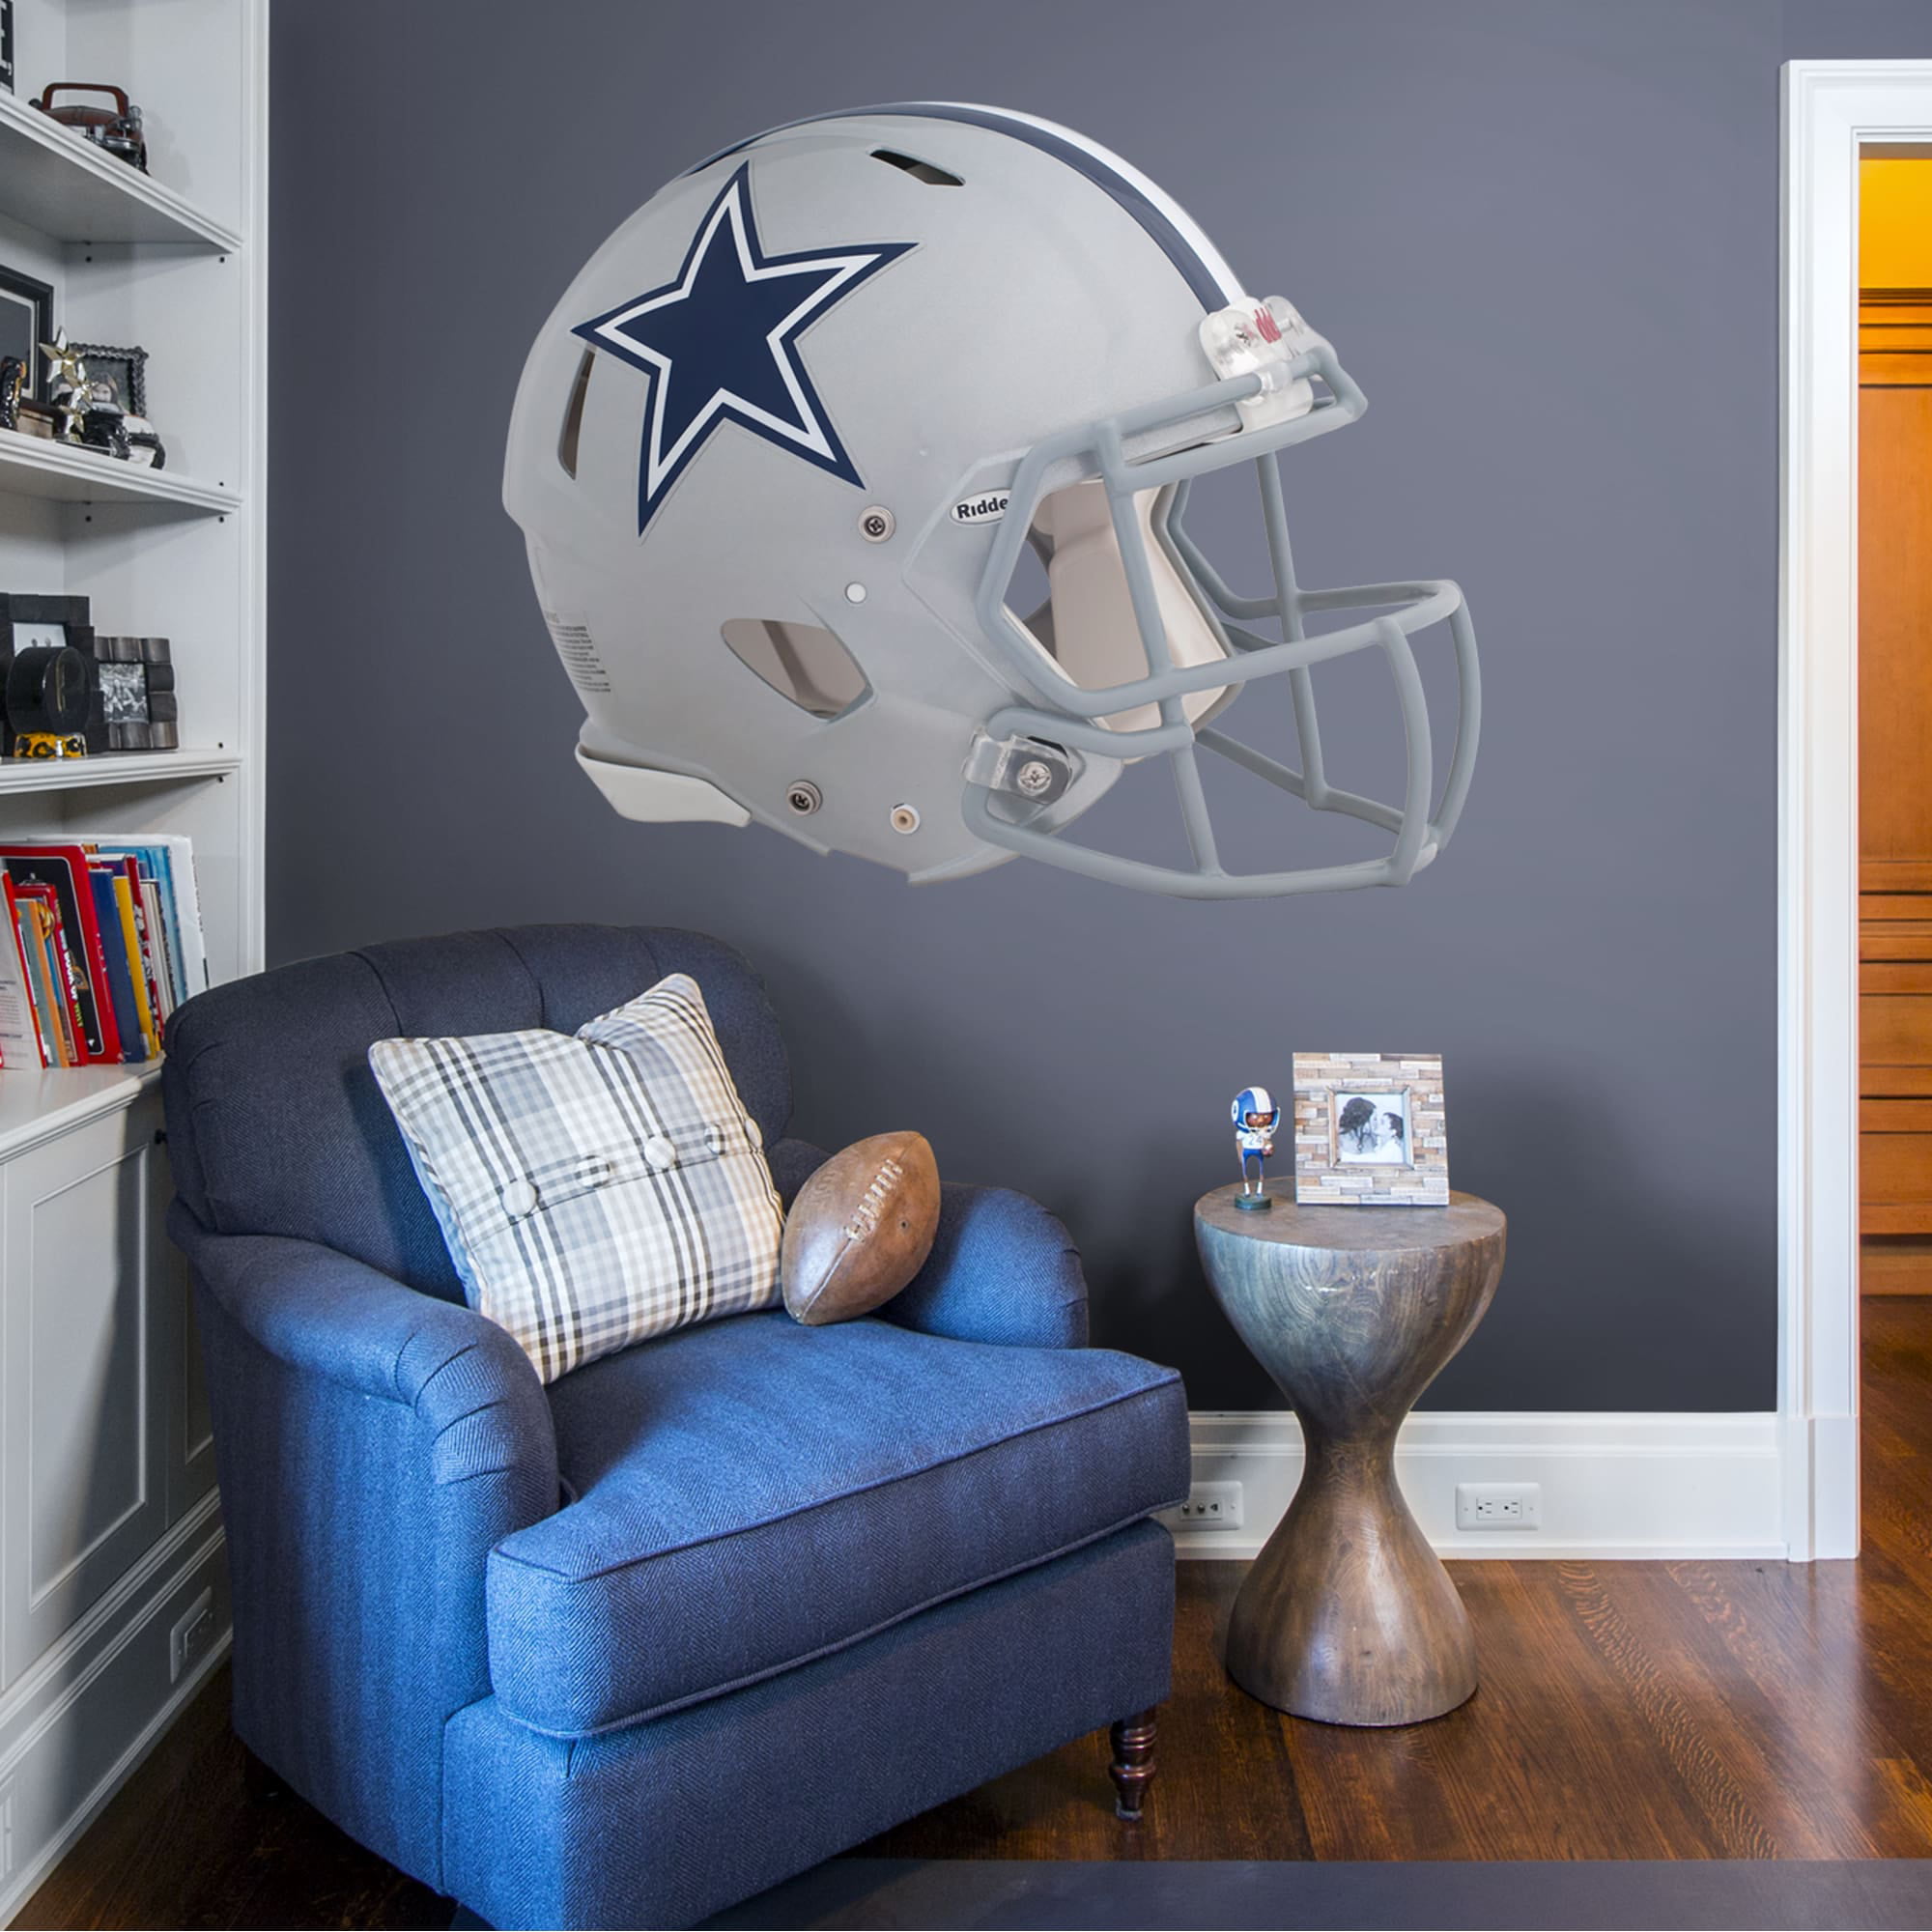 nfl wall decals